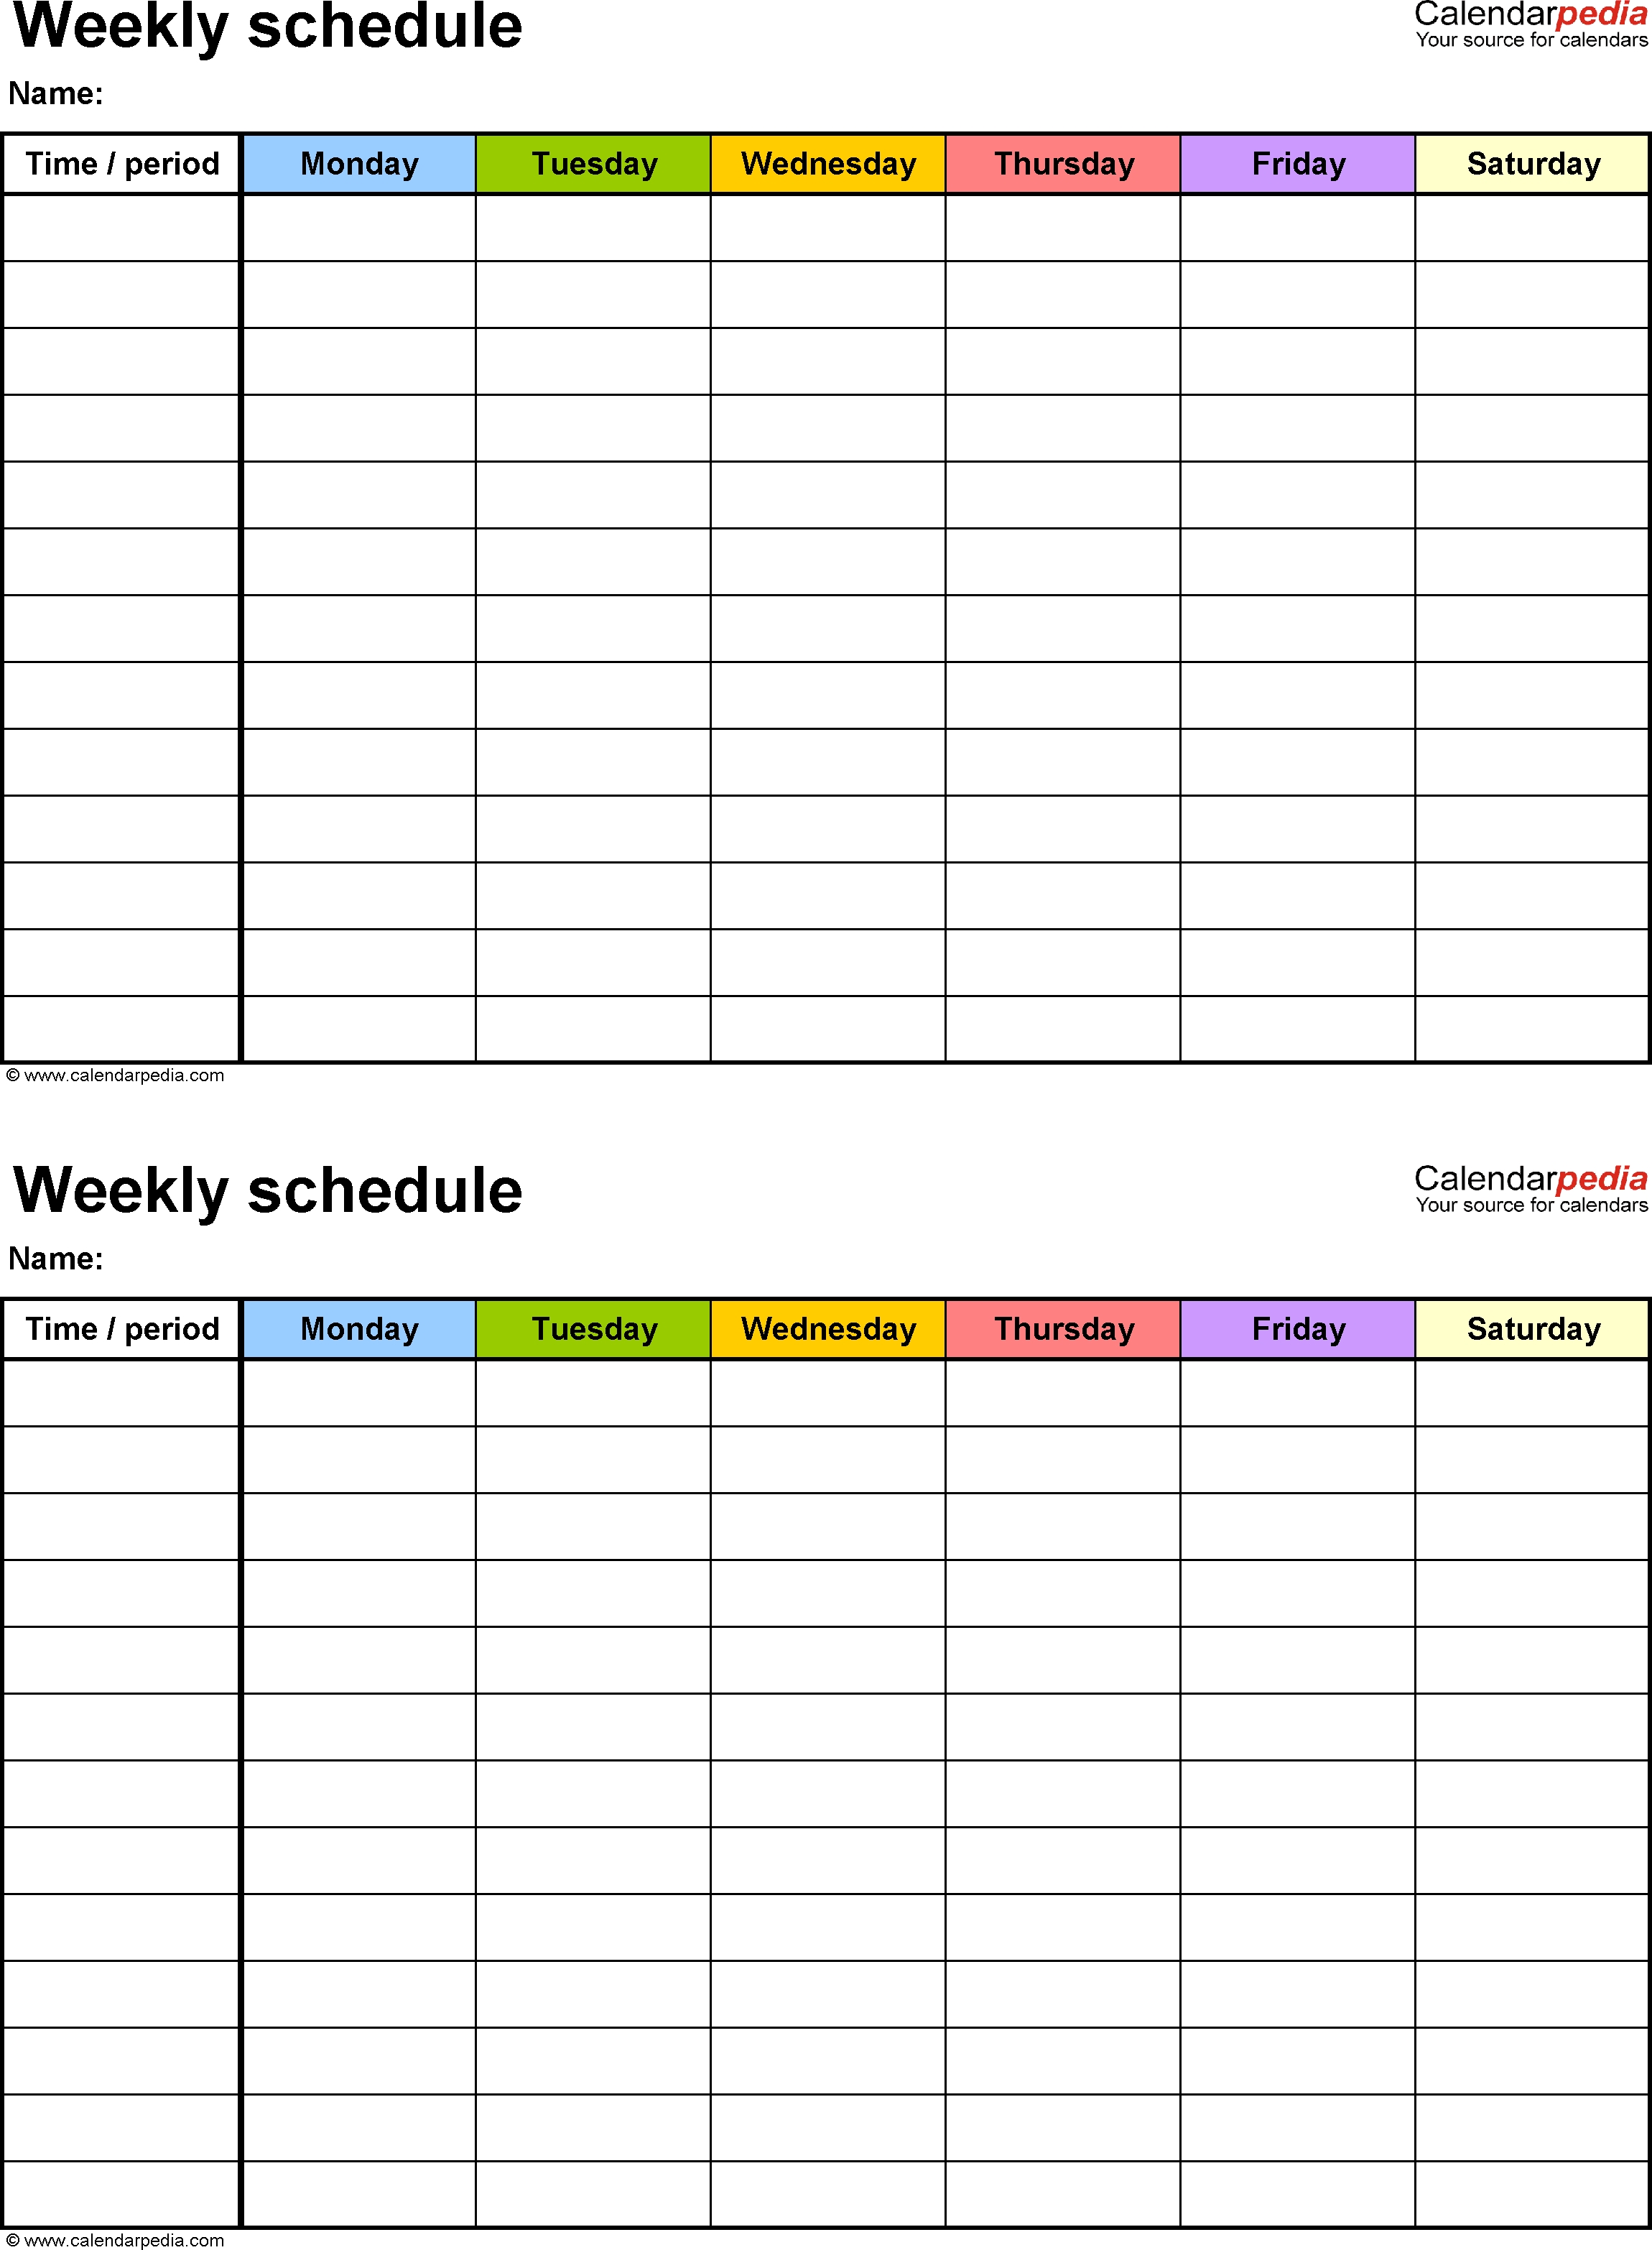 Weekly Schedule Template For Word Version 9: 2 Schedules On One Page with Monday Through Friday Daily Planner